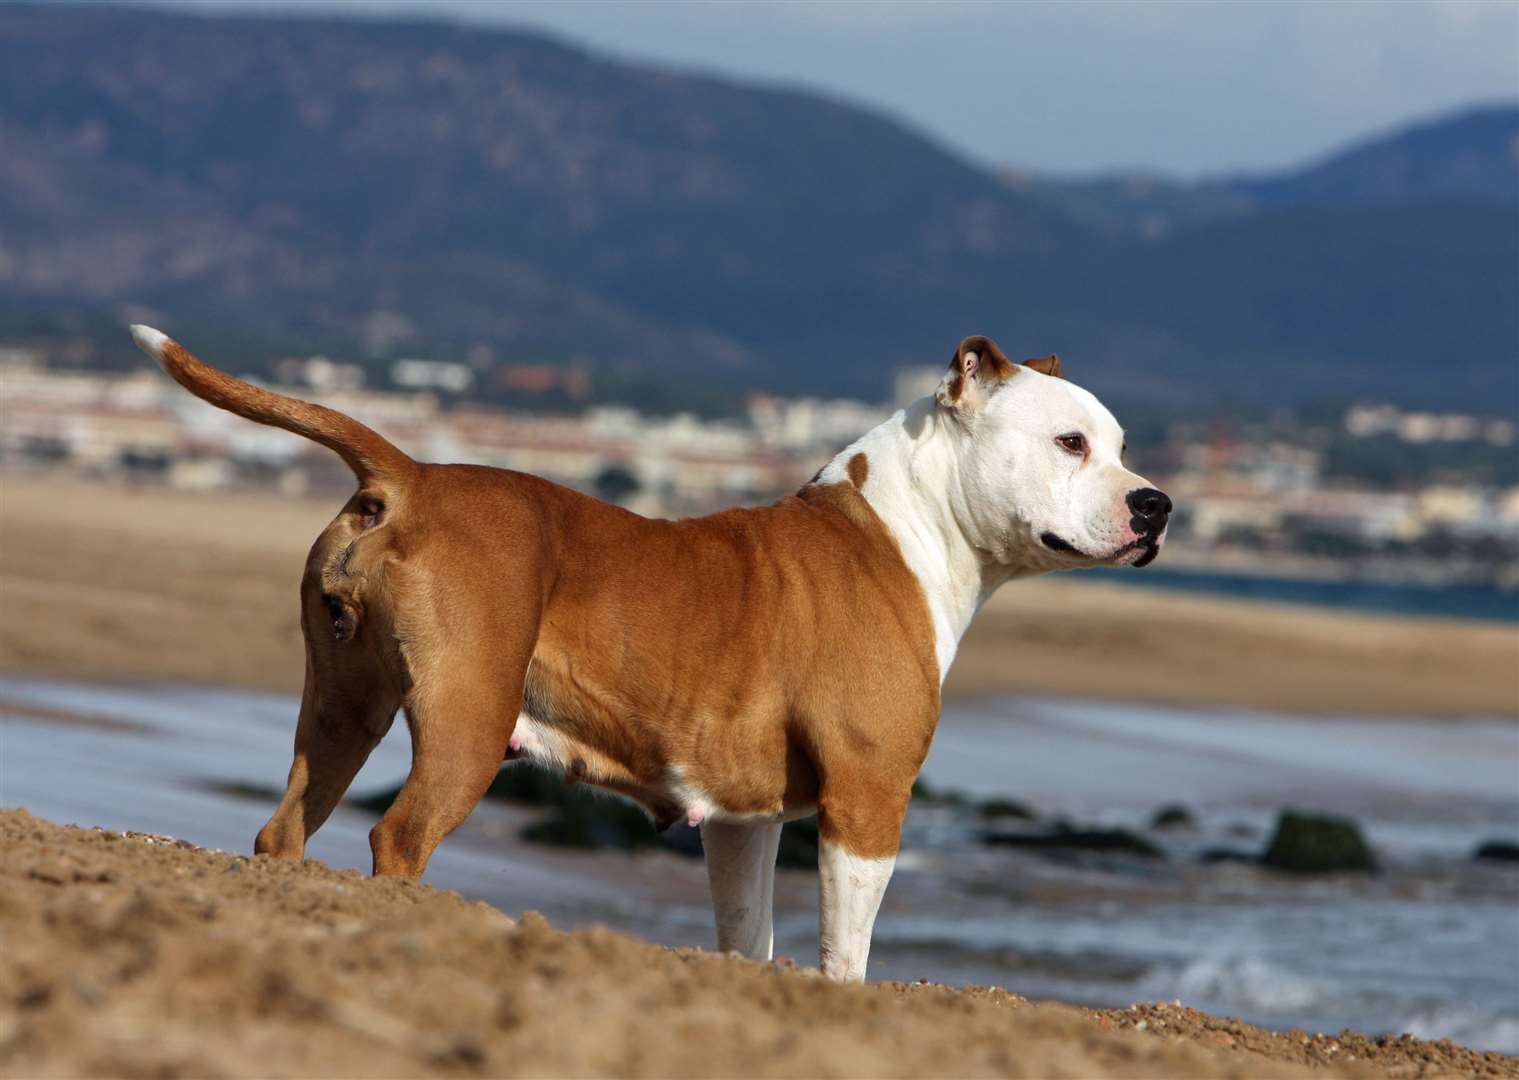 An American Staffordshire bull terrier. This is a stock image.